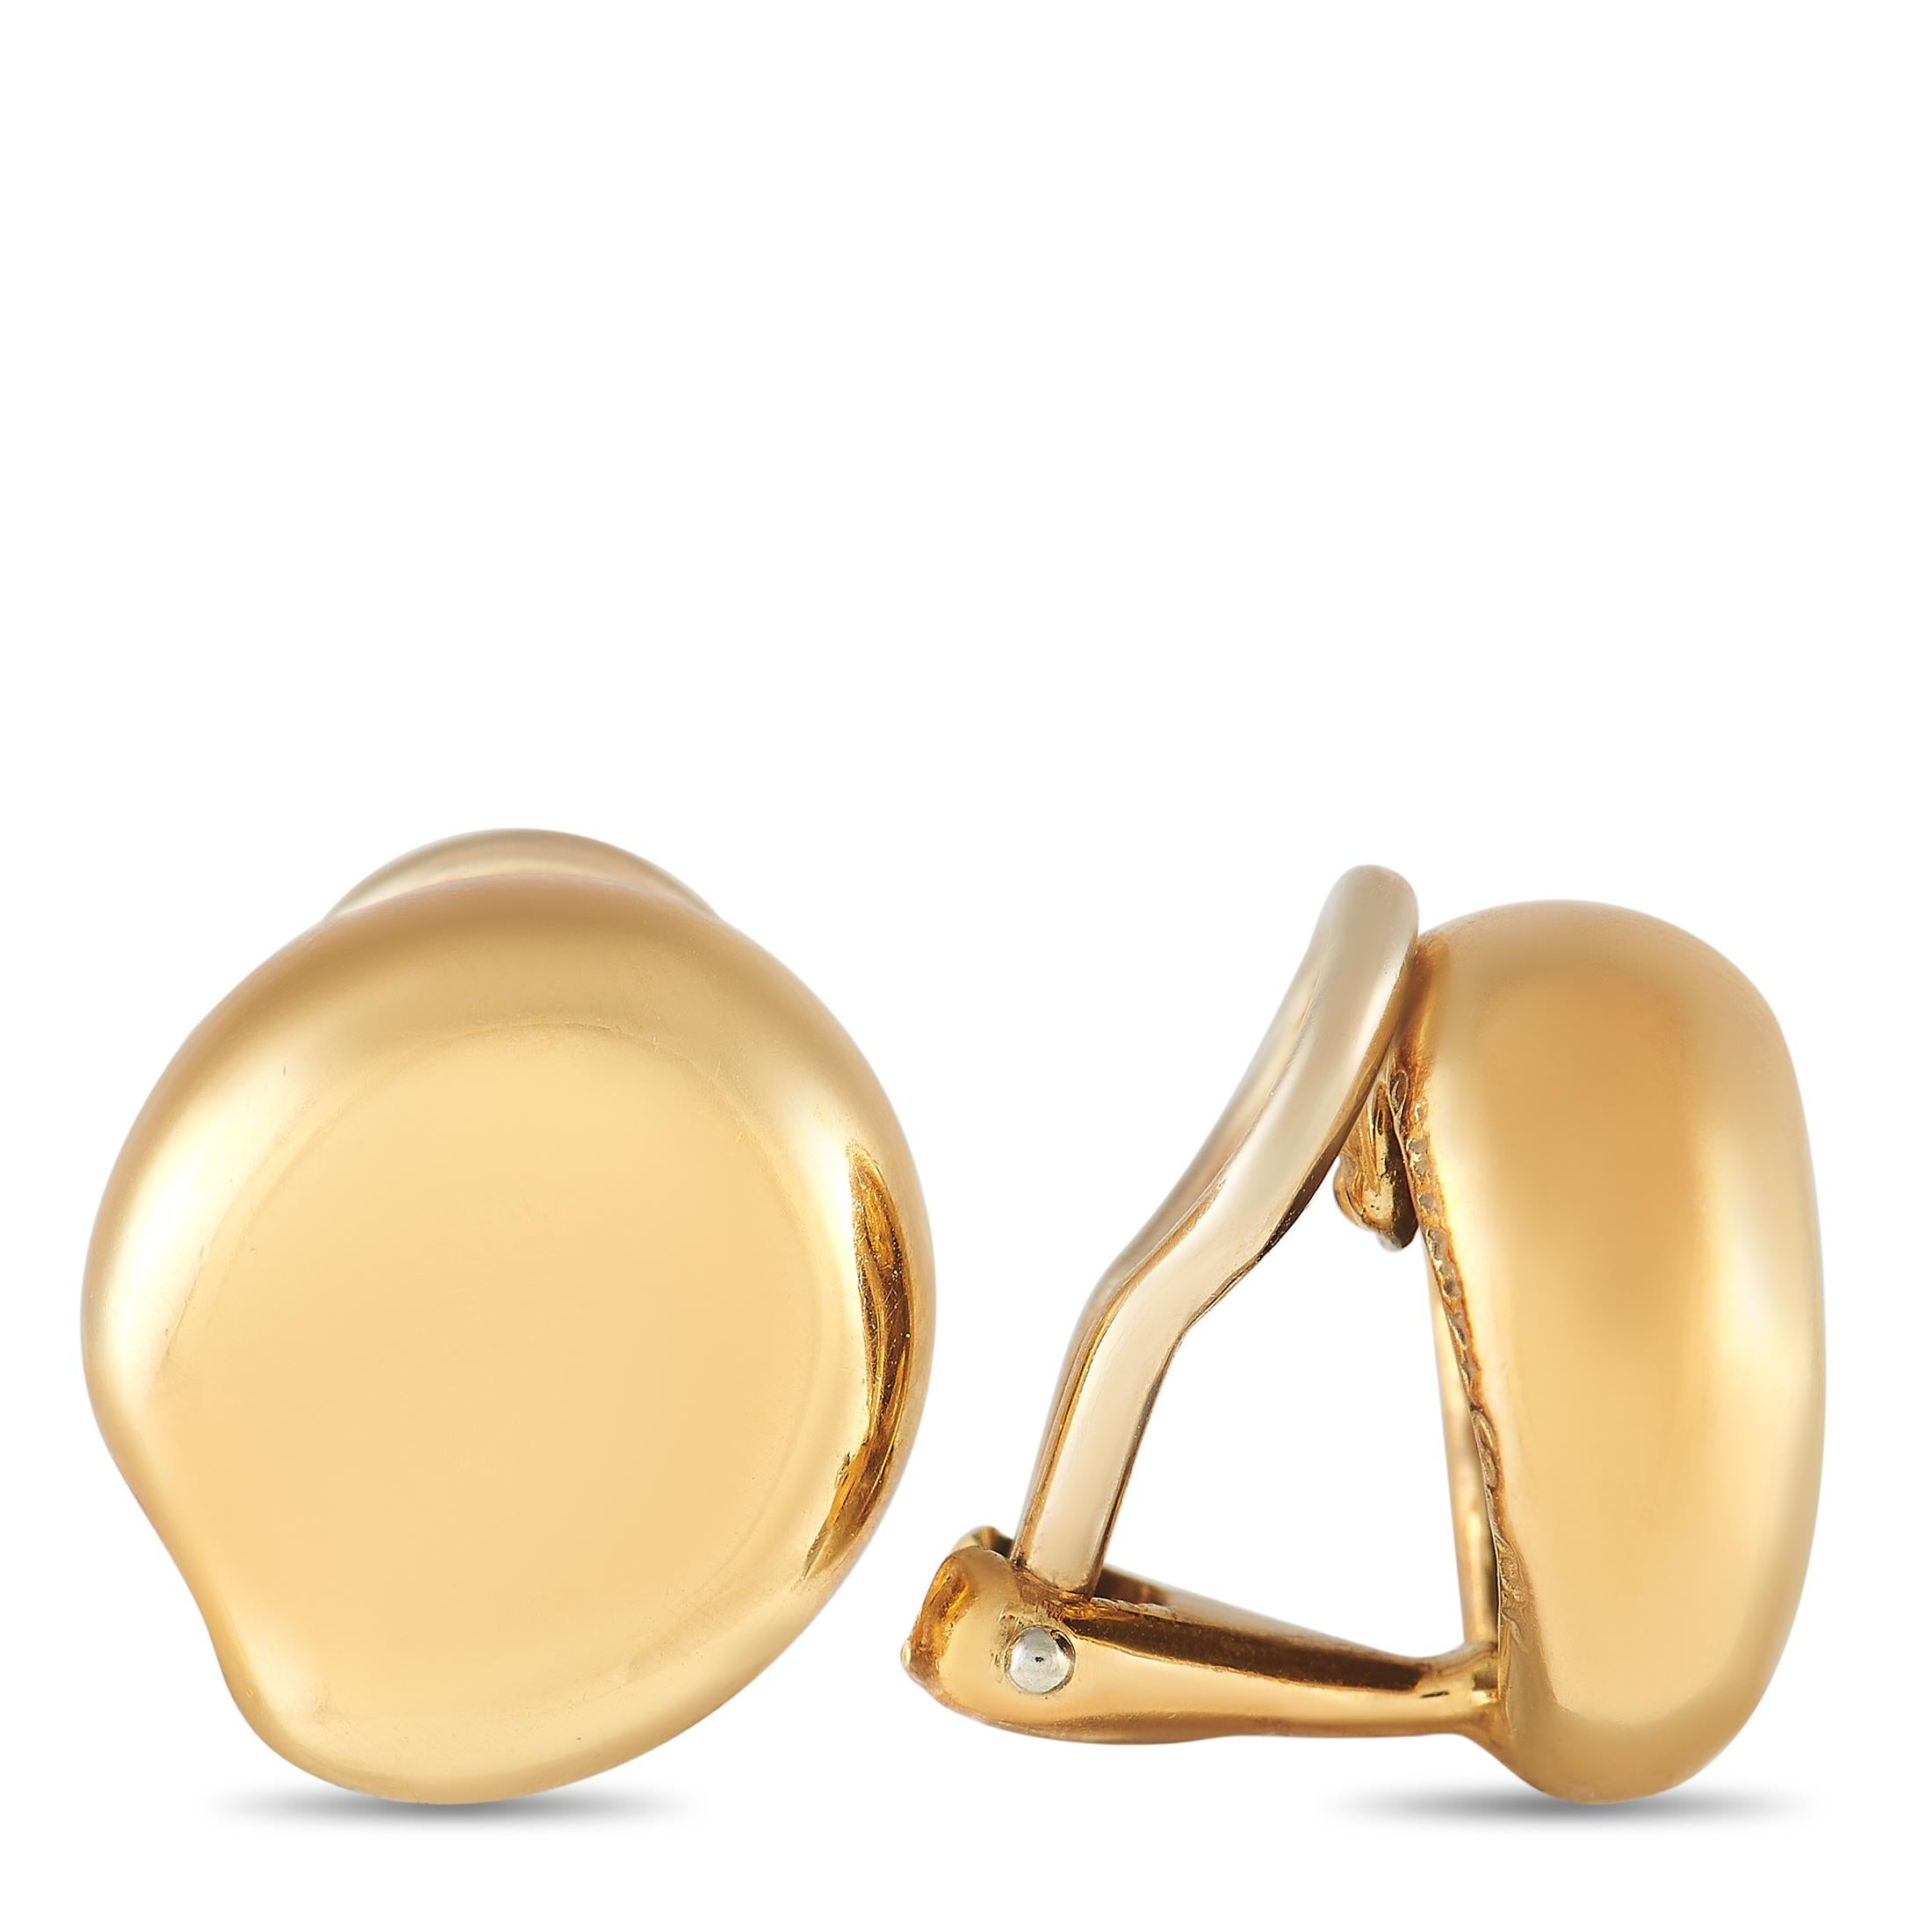 Designed by Elsa Peretti under her trademarked Bean design, these yellow gold clip-on earrings can polish any outfit with feminine elegance. These clip-ons feature smooth contours and soft curves modeled after the natural and organic quality of a